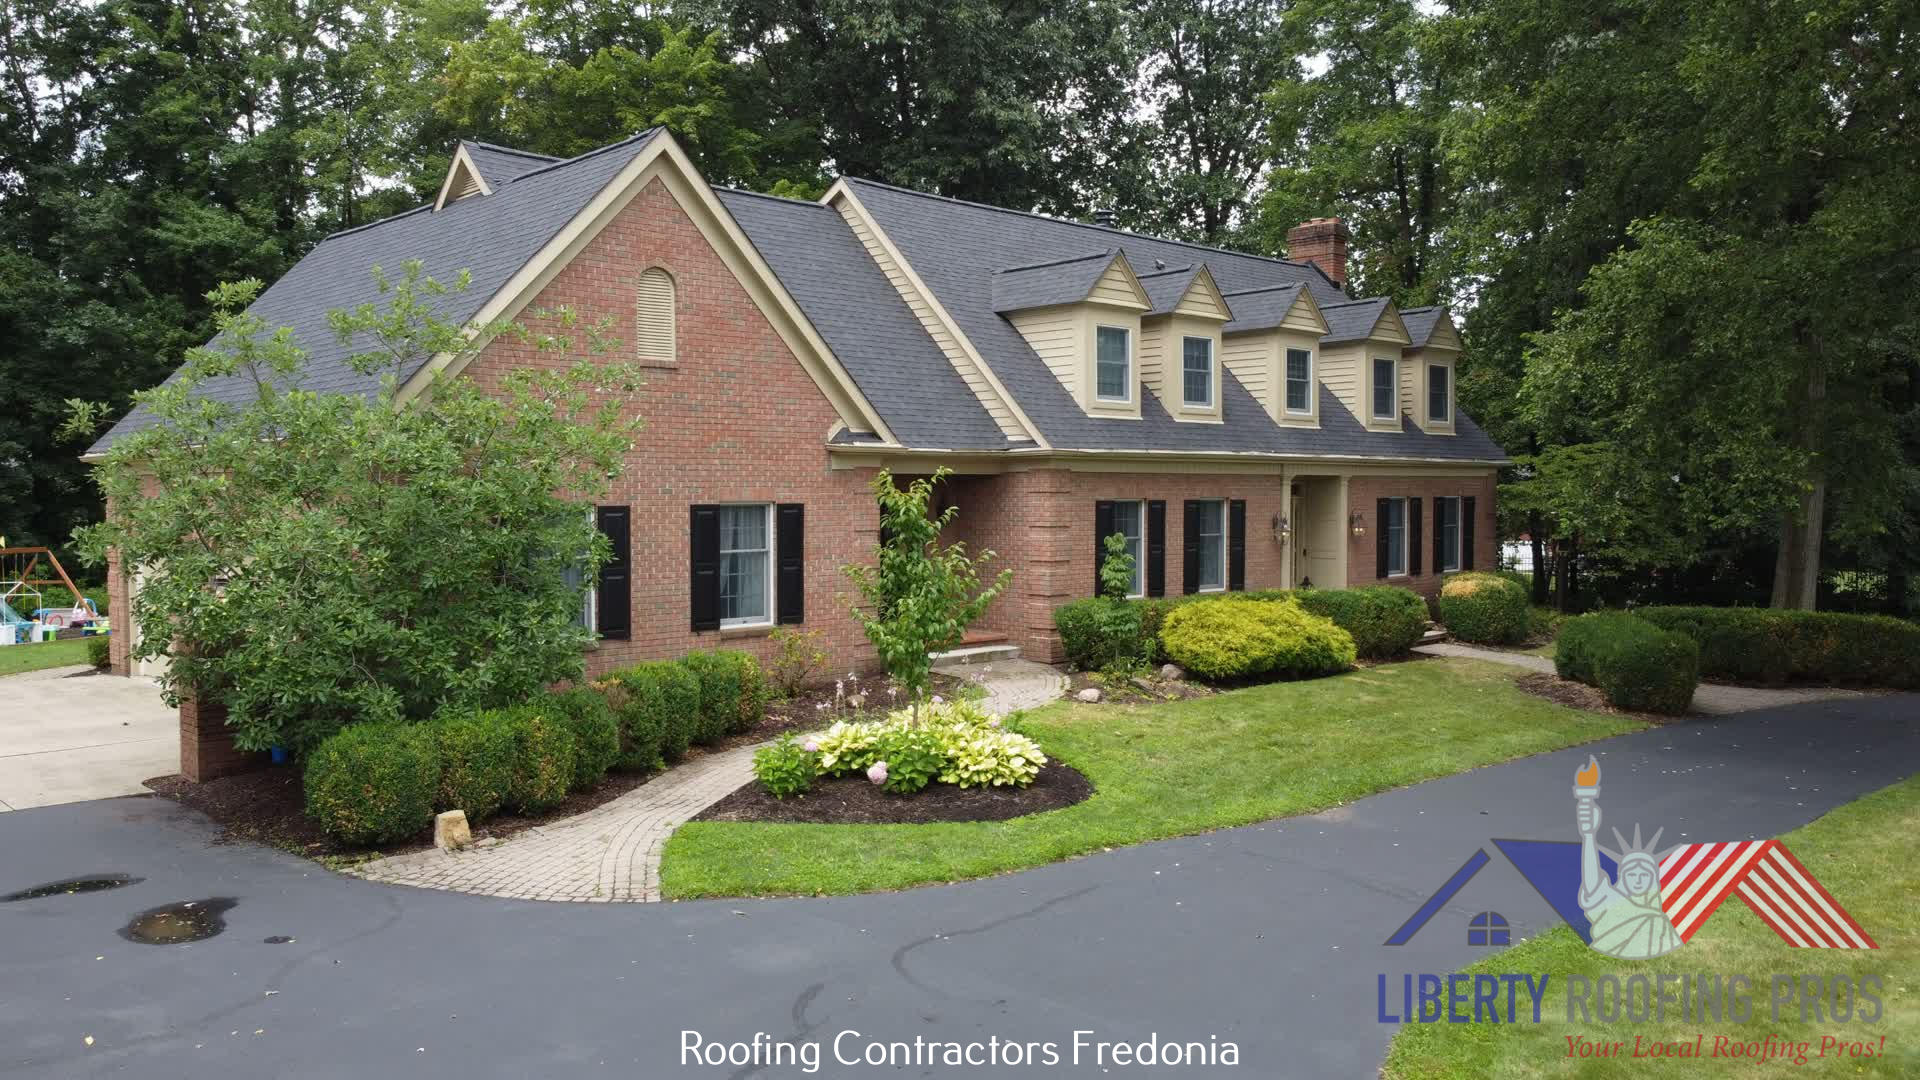 Liberty Roofing Pros LLC Outlines the Factors that Impact the Cost of Roof Replacement 